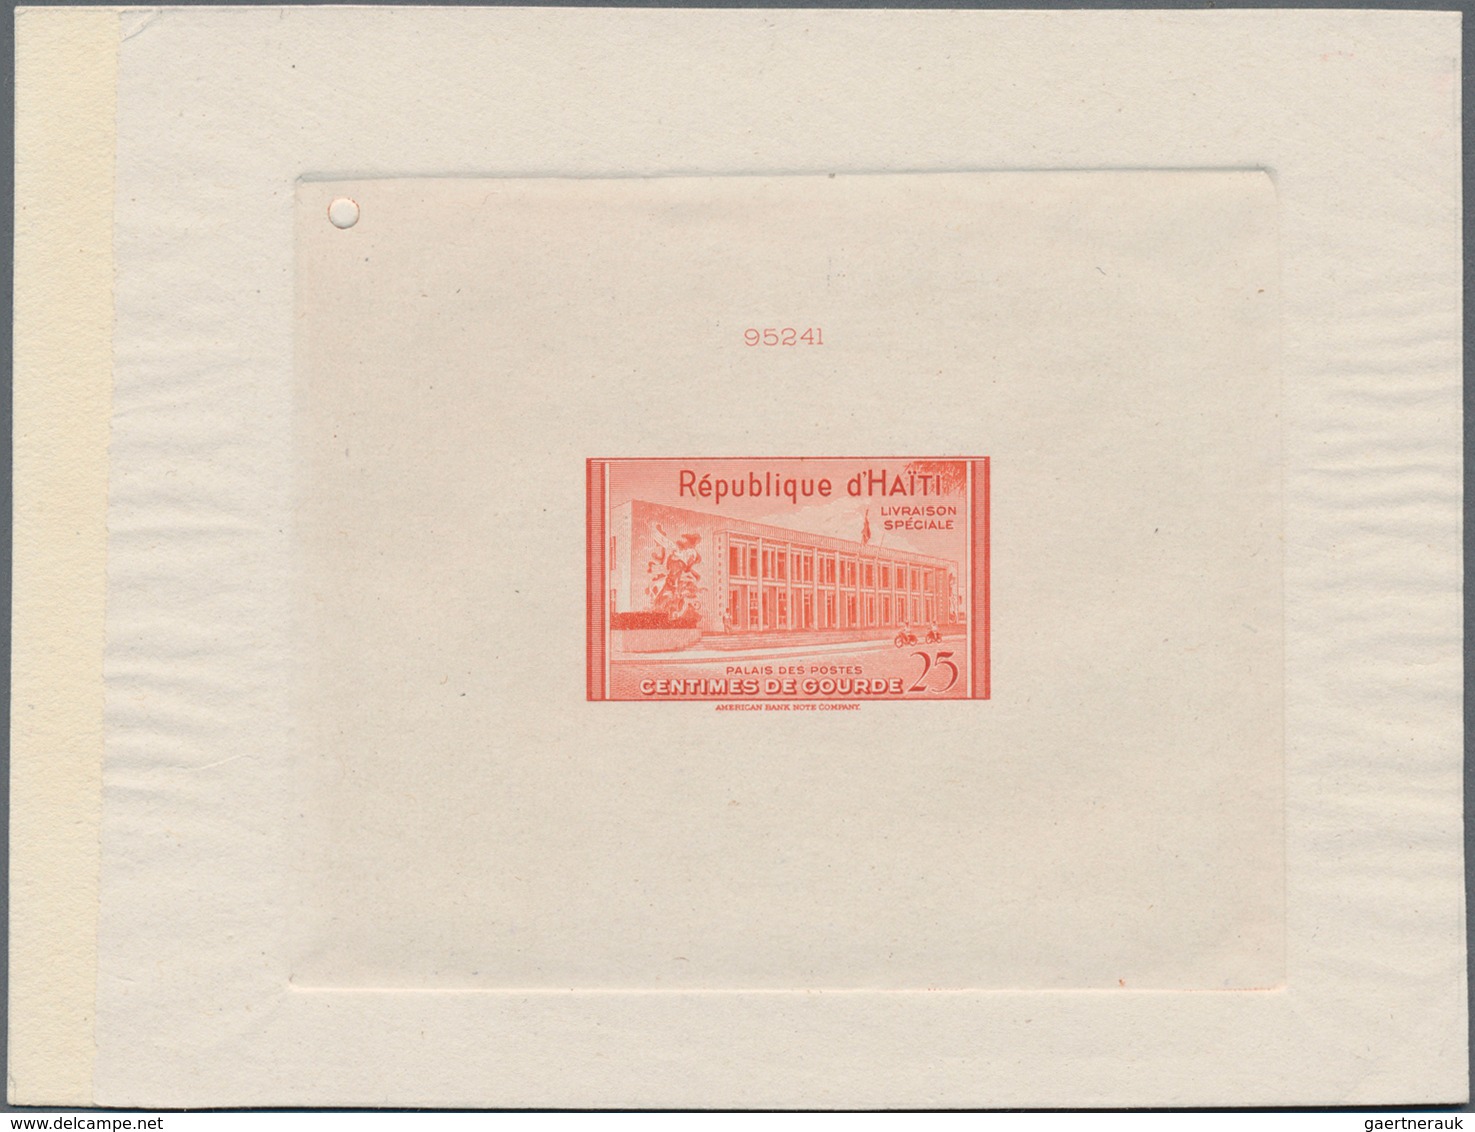 Haiti: 1953. Lot Of 3 Different Epreuves For The 25c Express Stamp Showing Main Post Office. - Haiti